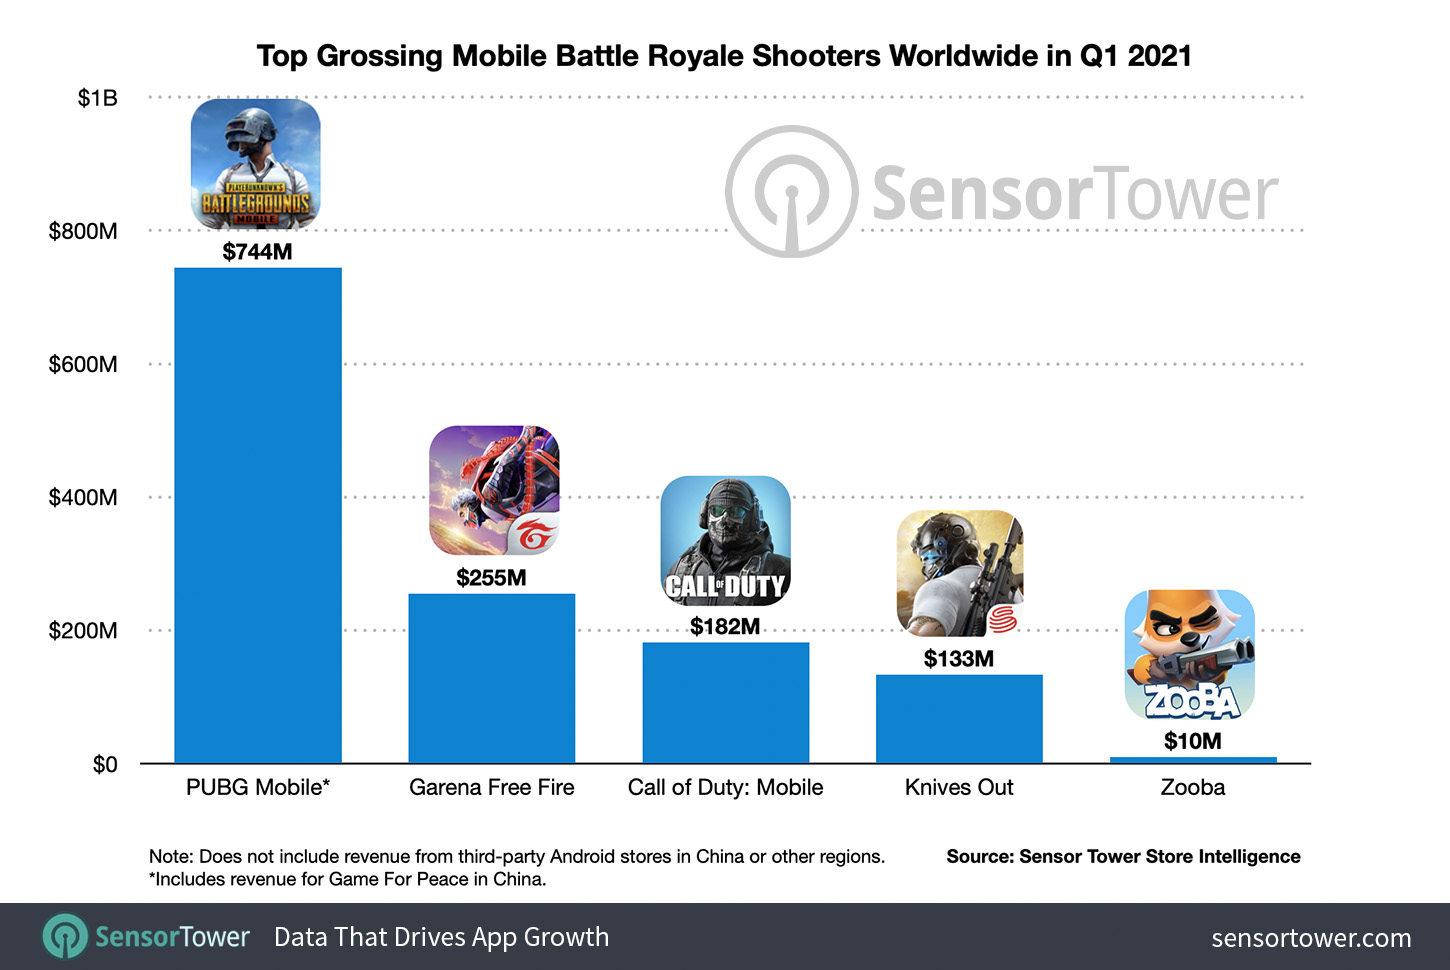 Top Grossing Mobile Battle Royale Shooters Worldwide in Q1 2021